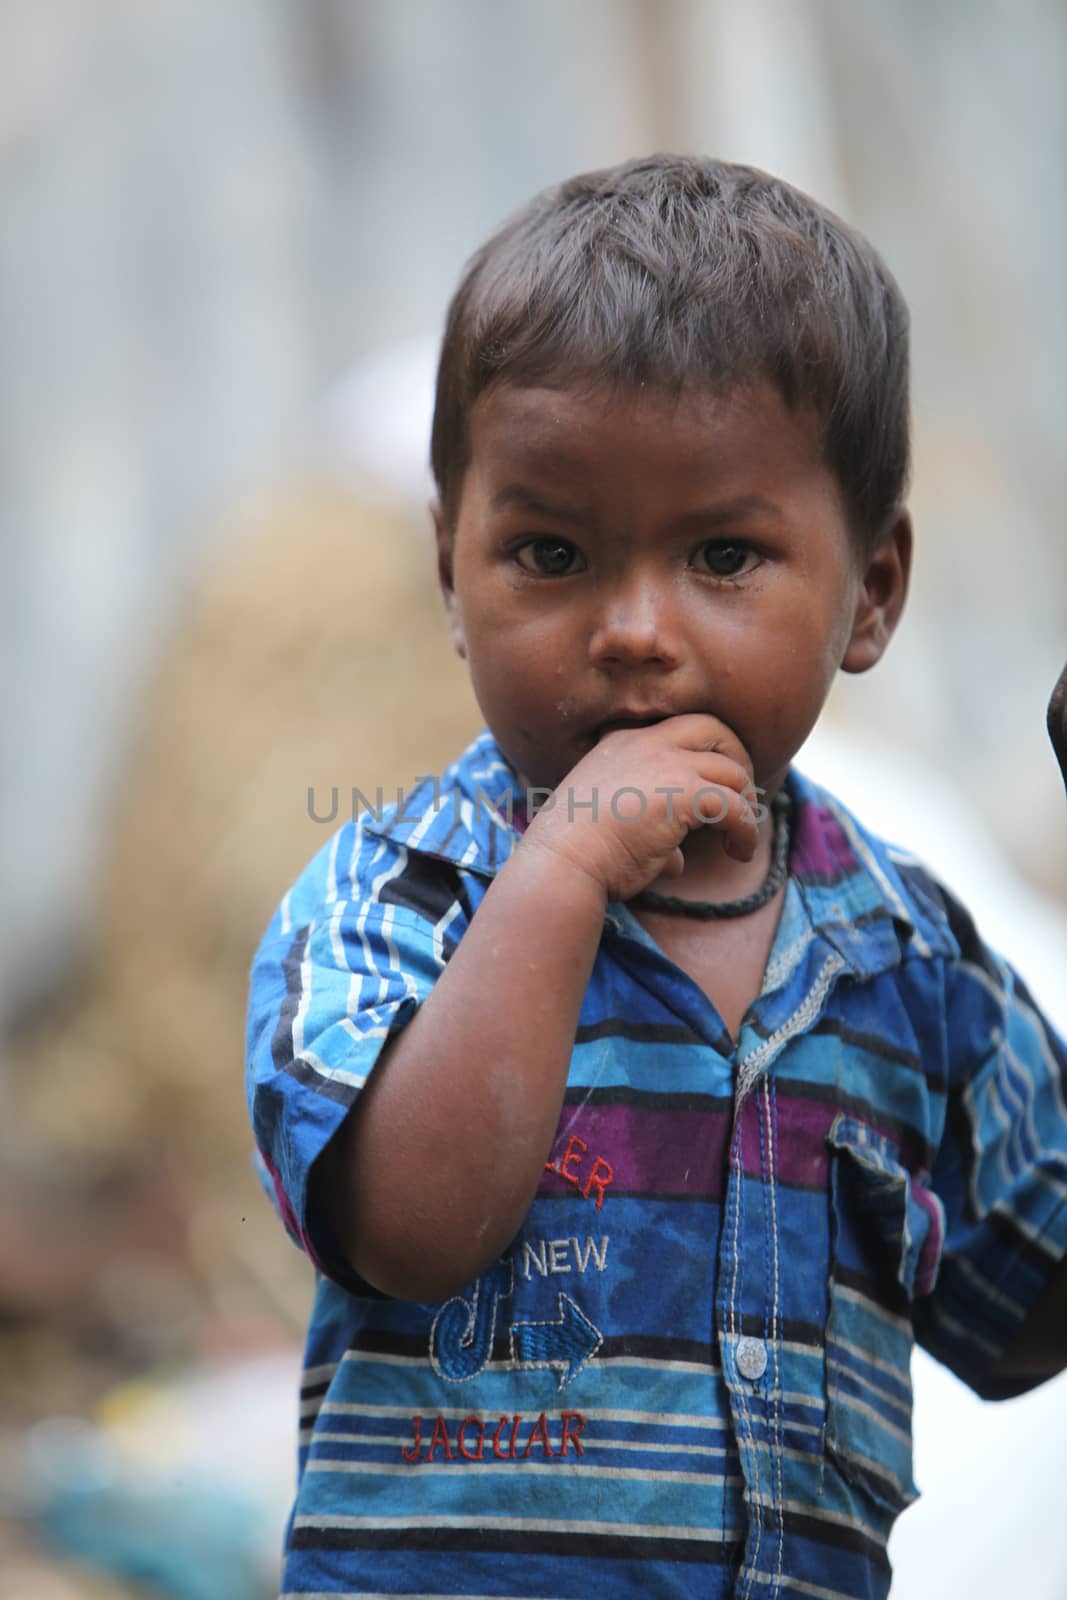 A portrait of a poor little Indian boy putting finger in his mouth.